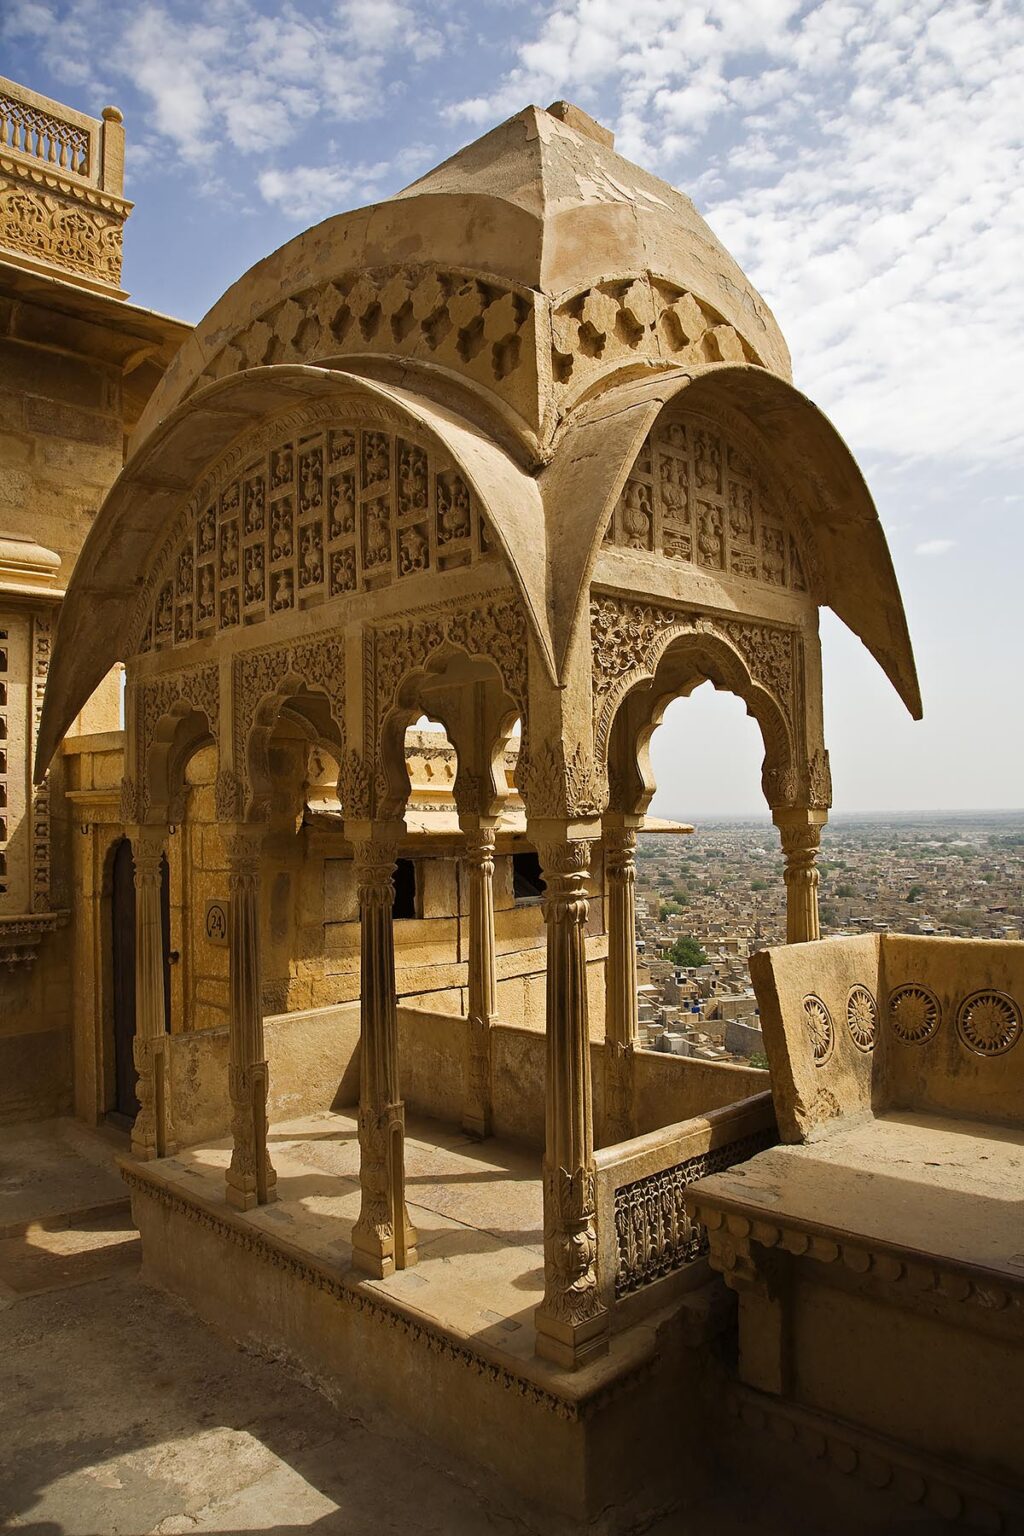 Intricately carved sandstone rooftop sitting platform in  the MAHARAJA'S PALACE located inside JAISALMER FORT - RAJASTHAN, INDIA